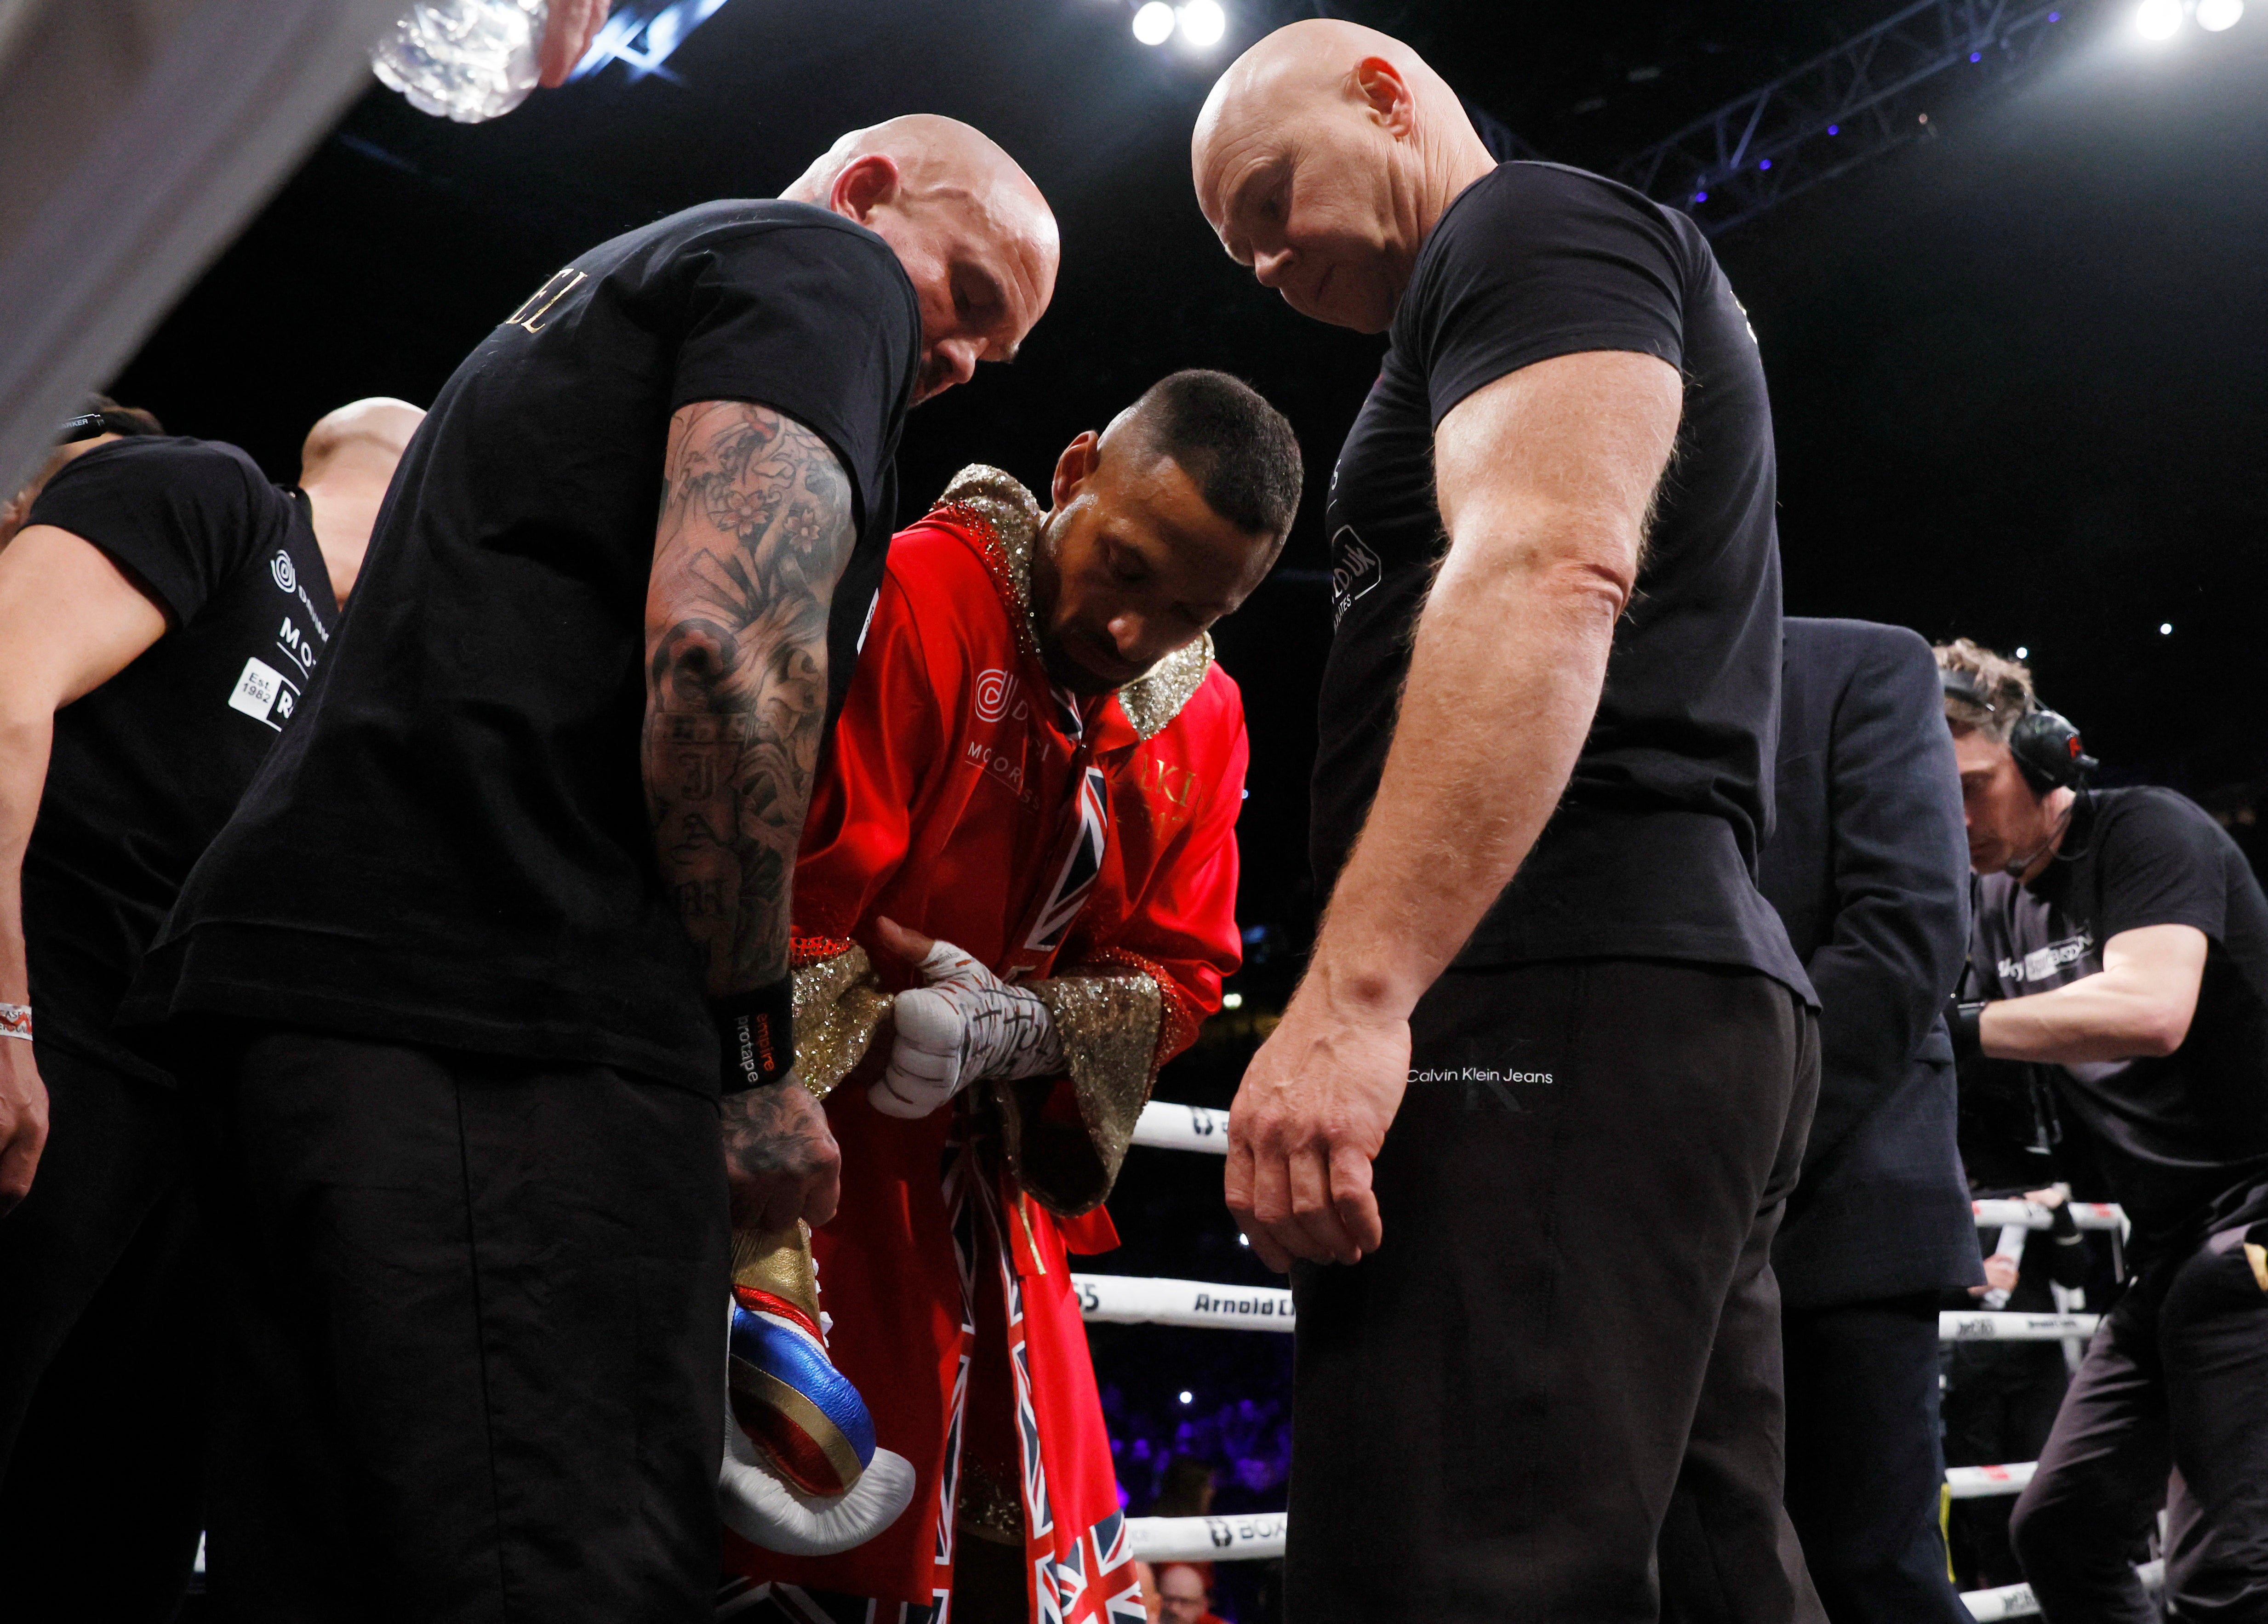 Kell Brook’s gloves are changed moments before his bout with Amir Khan